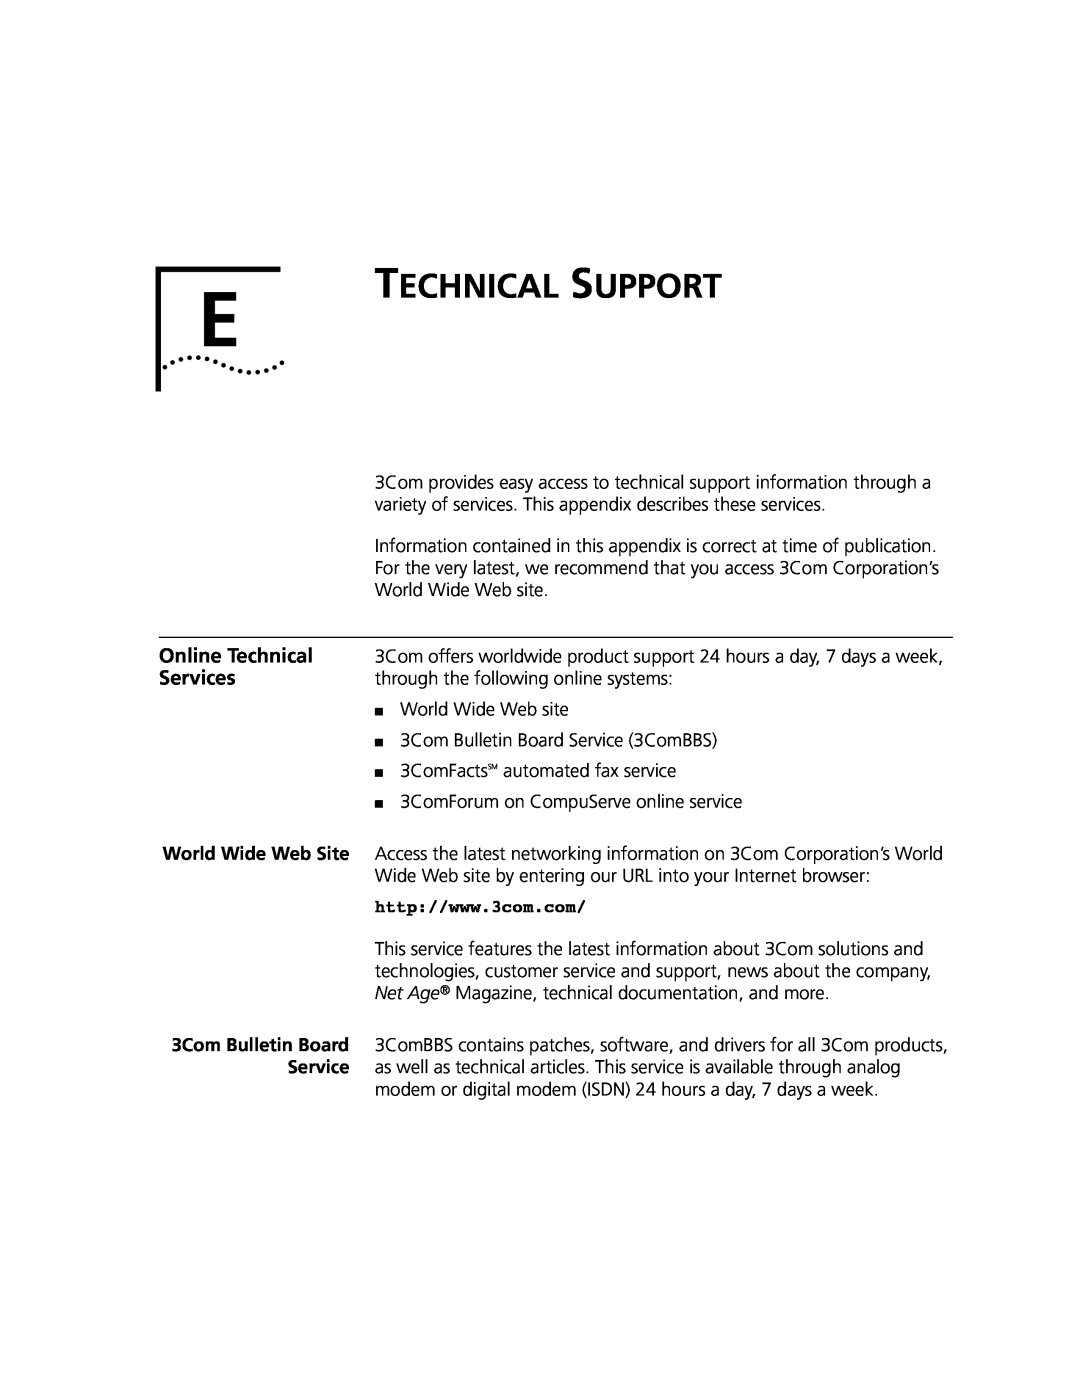 3Com 10002211 manual Online Technical, Services, Technical Support, 3Com Bulletin Board 